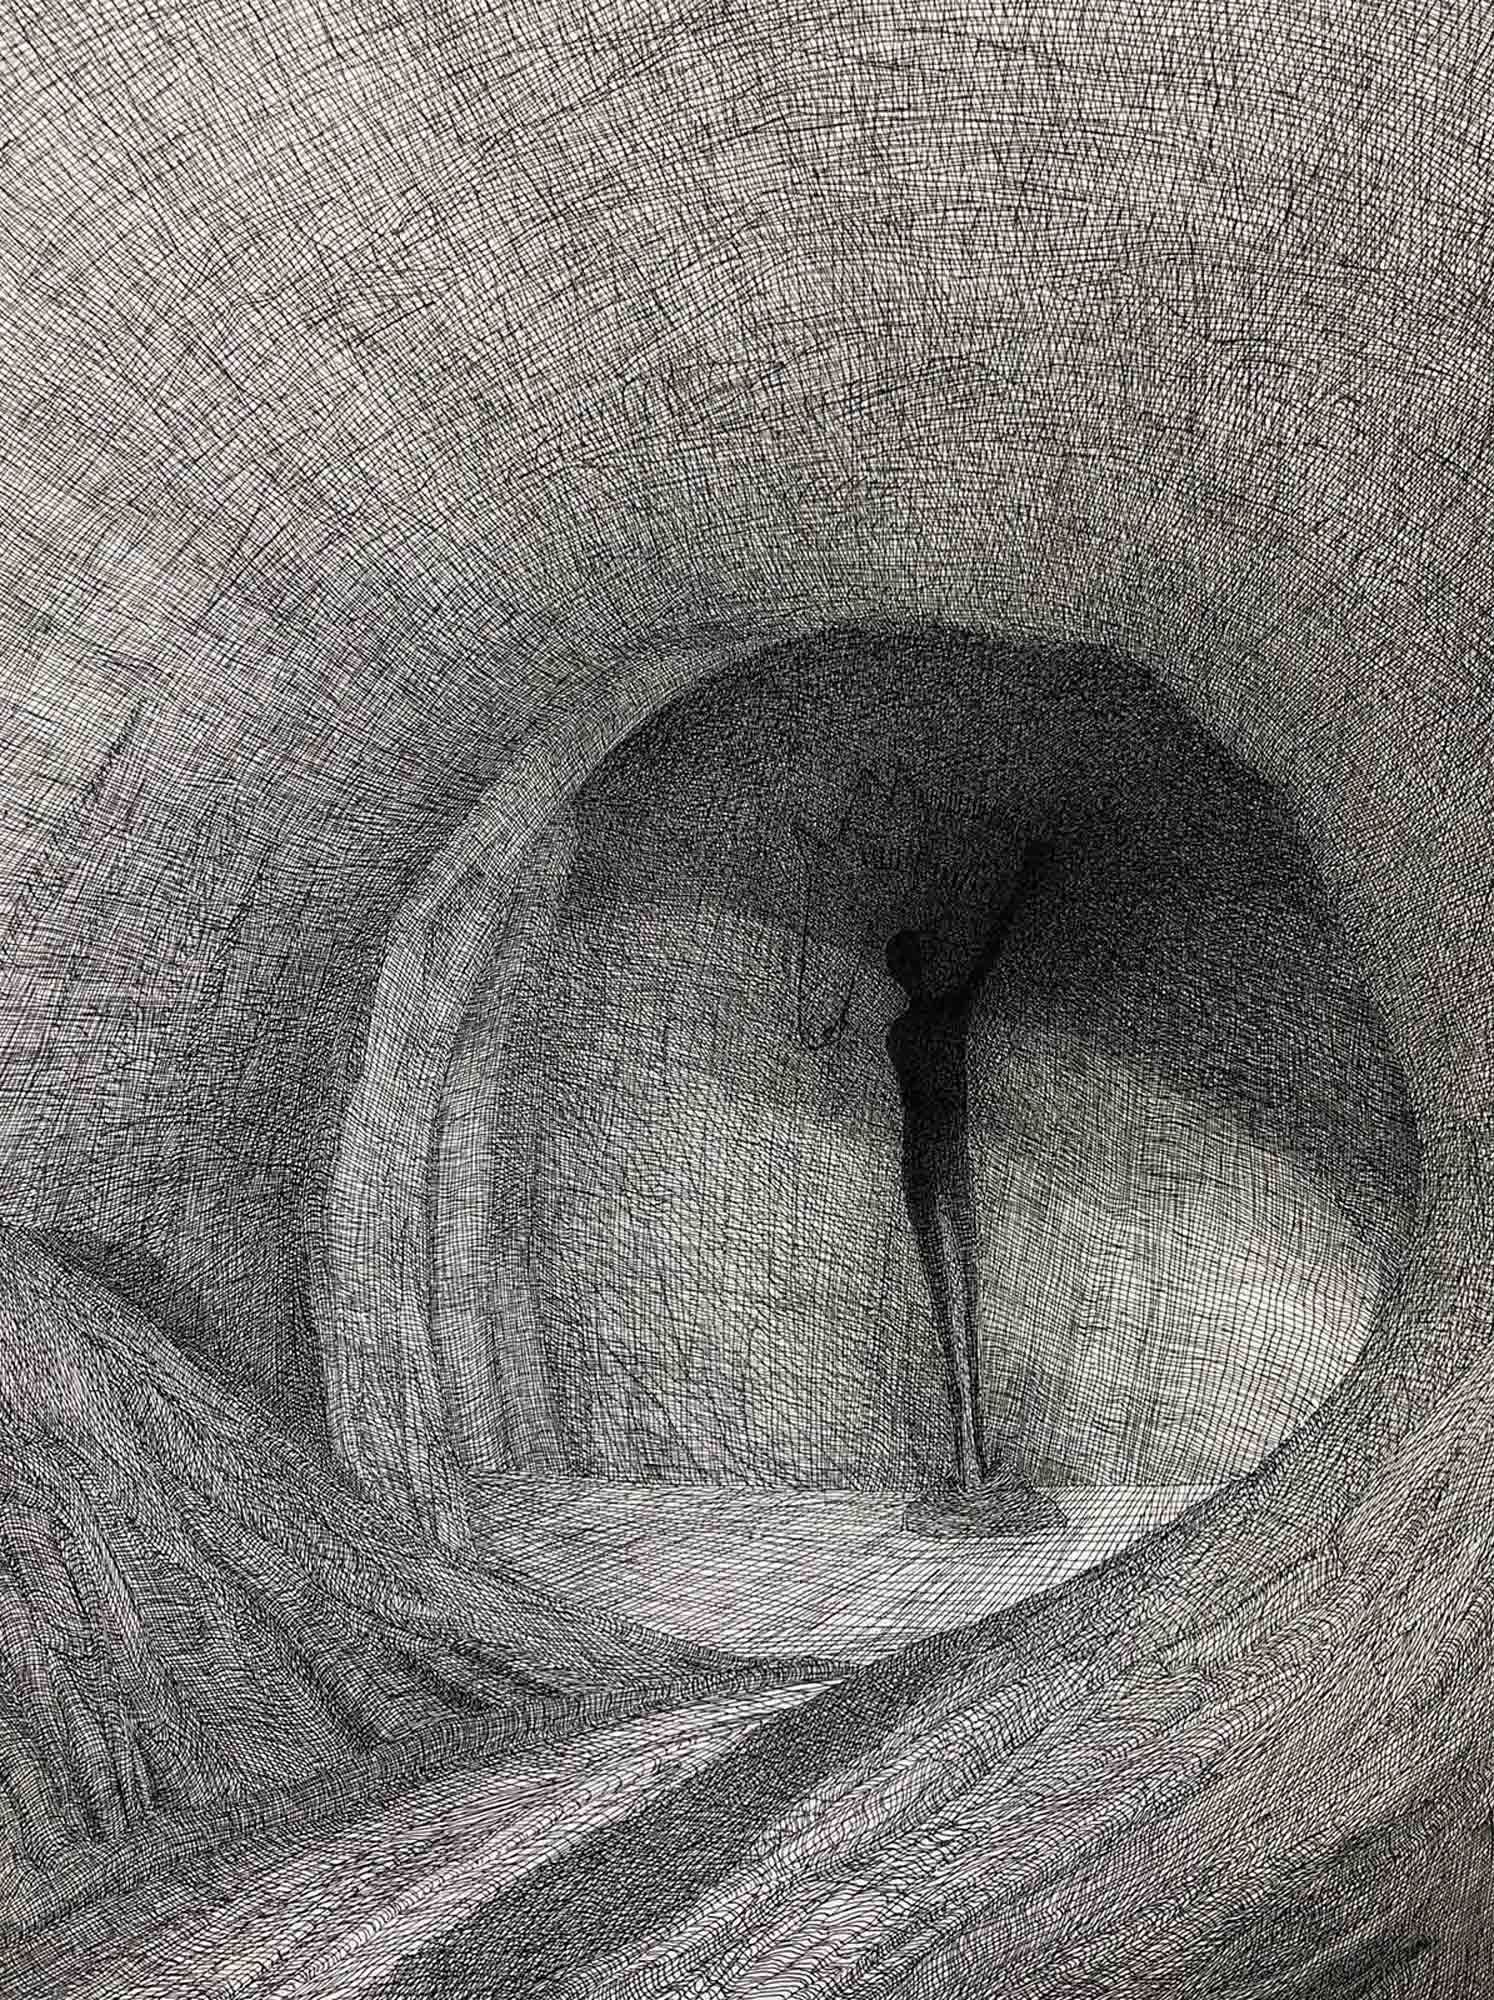 Mark Alexander's pen and ink depiction: Unearthly, shadowy figure sketches on a cave wall.